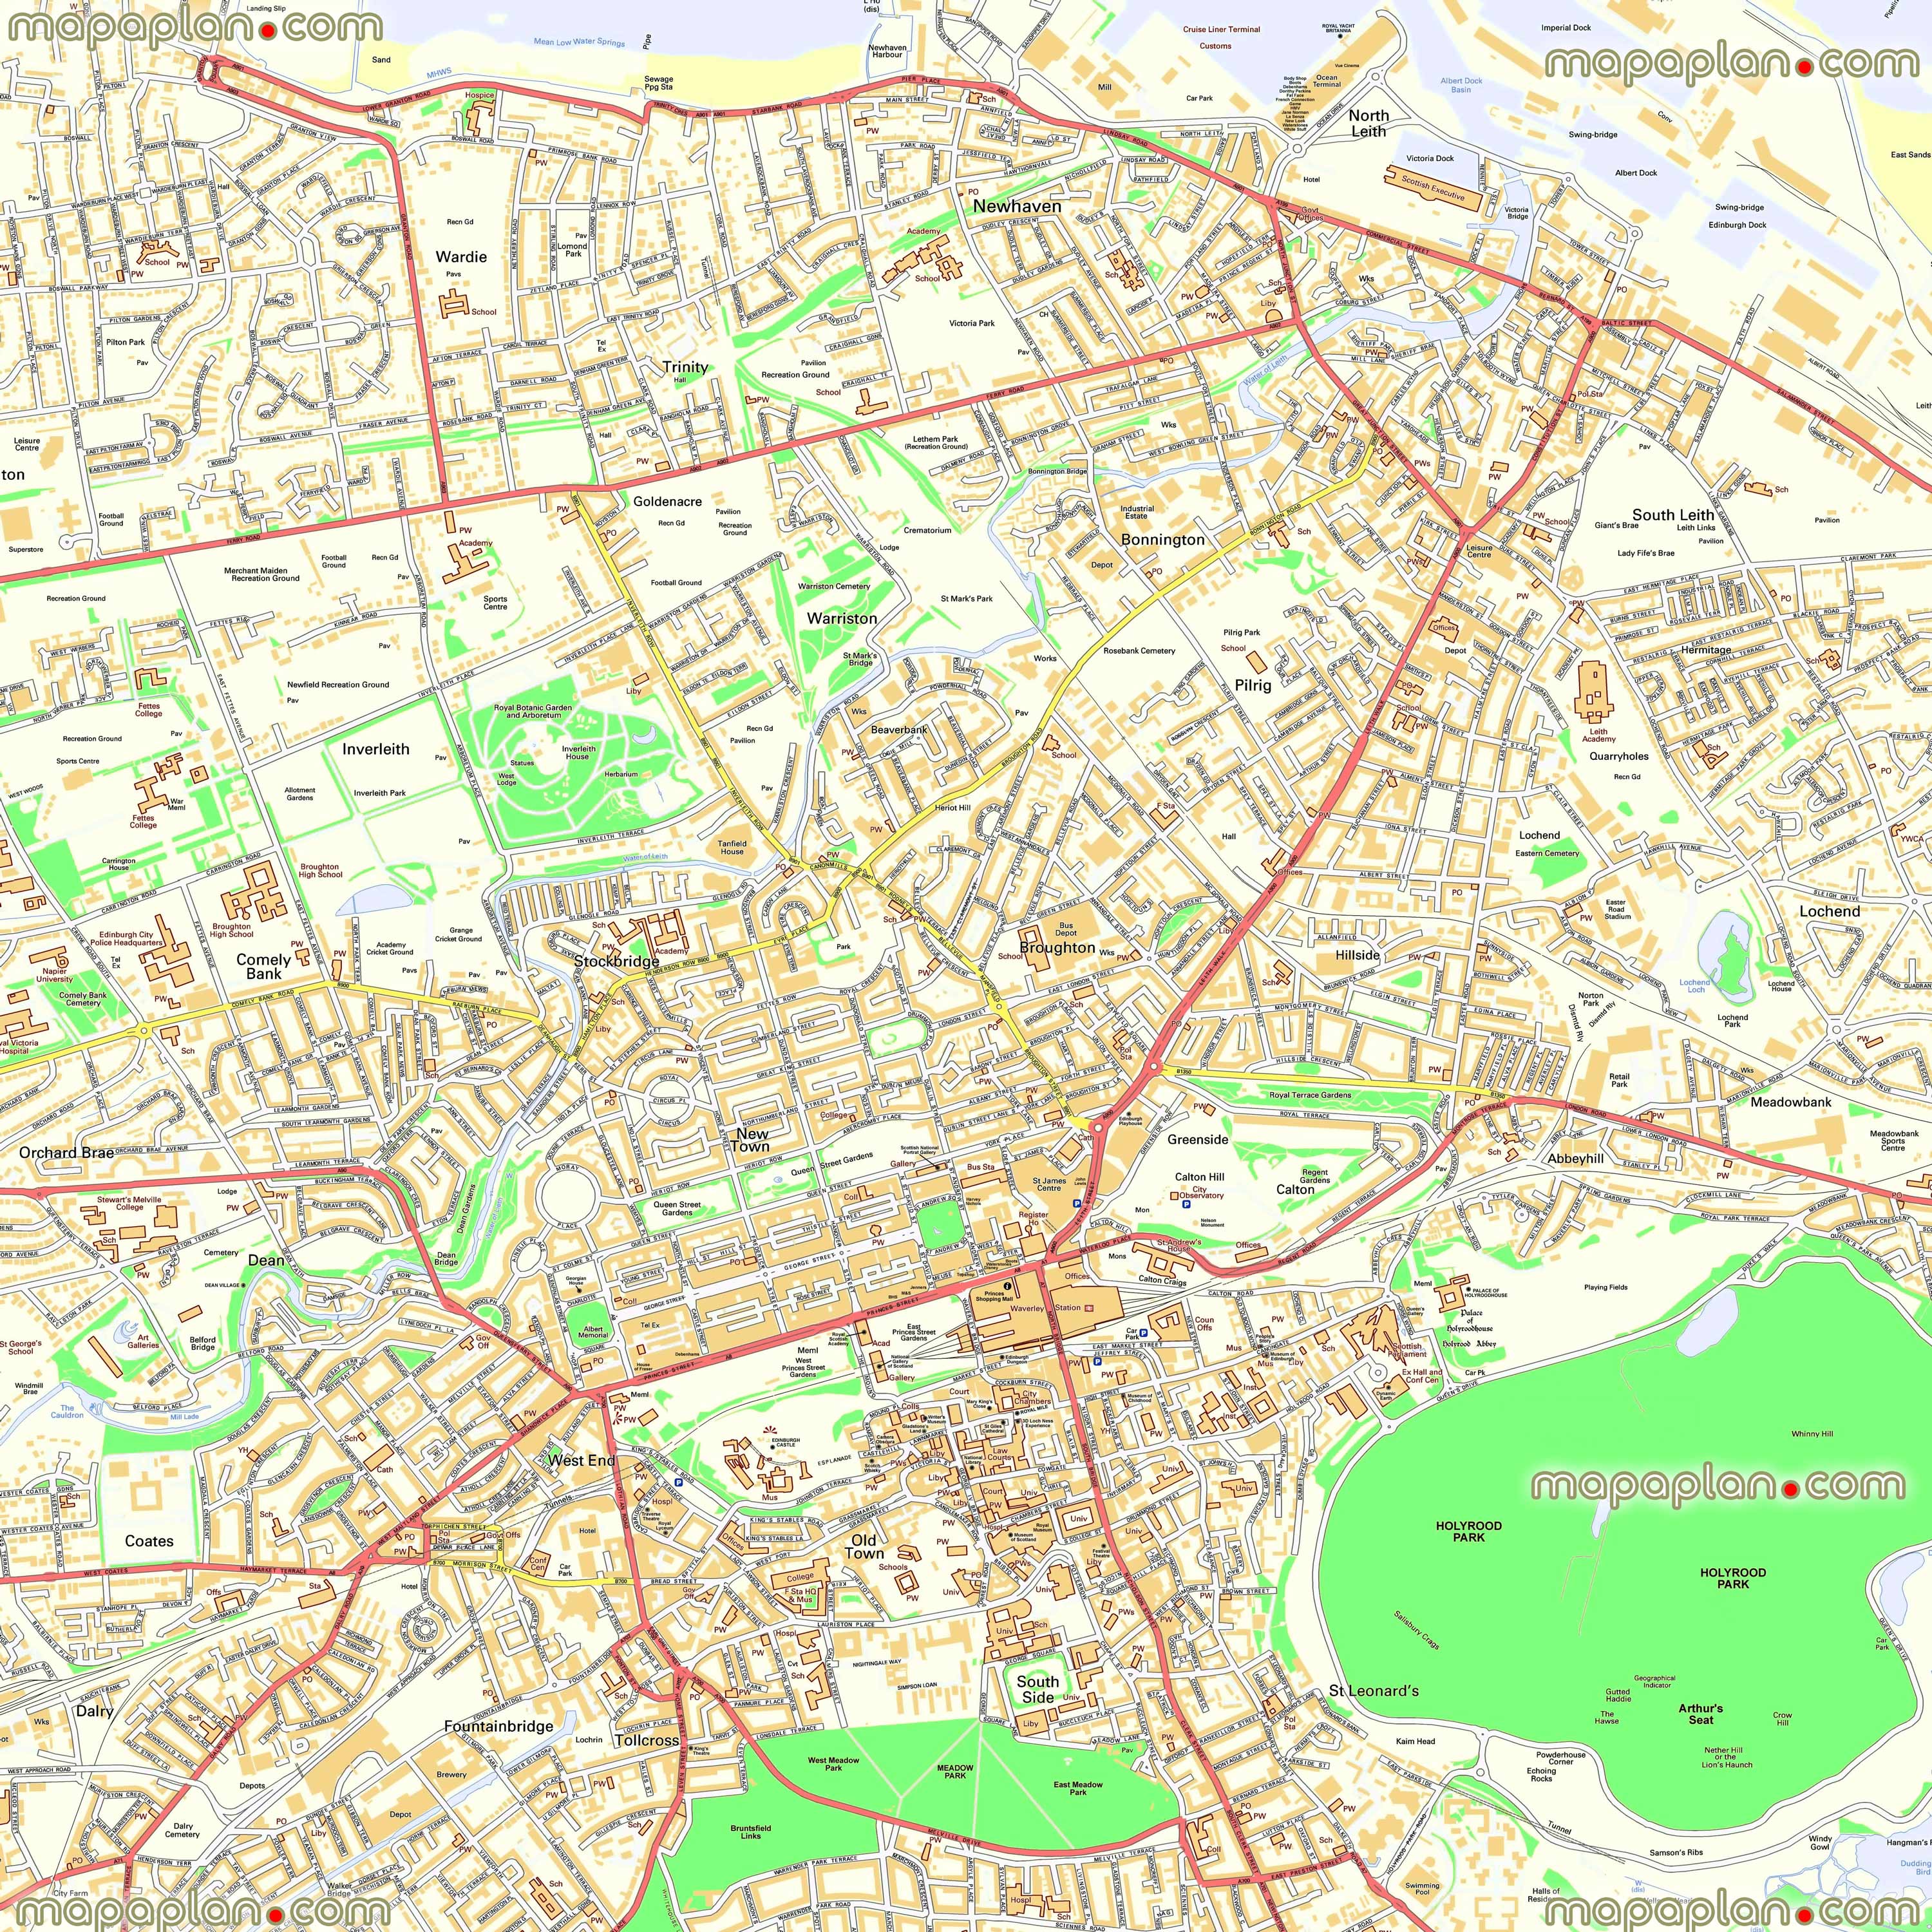 free download street road names detailed hd maps Edinburgh Top tourist attractions map